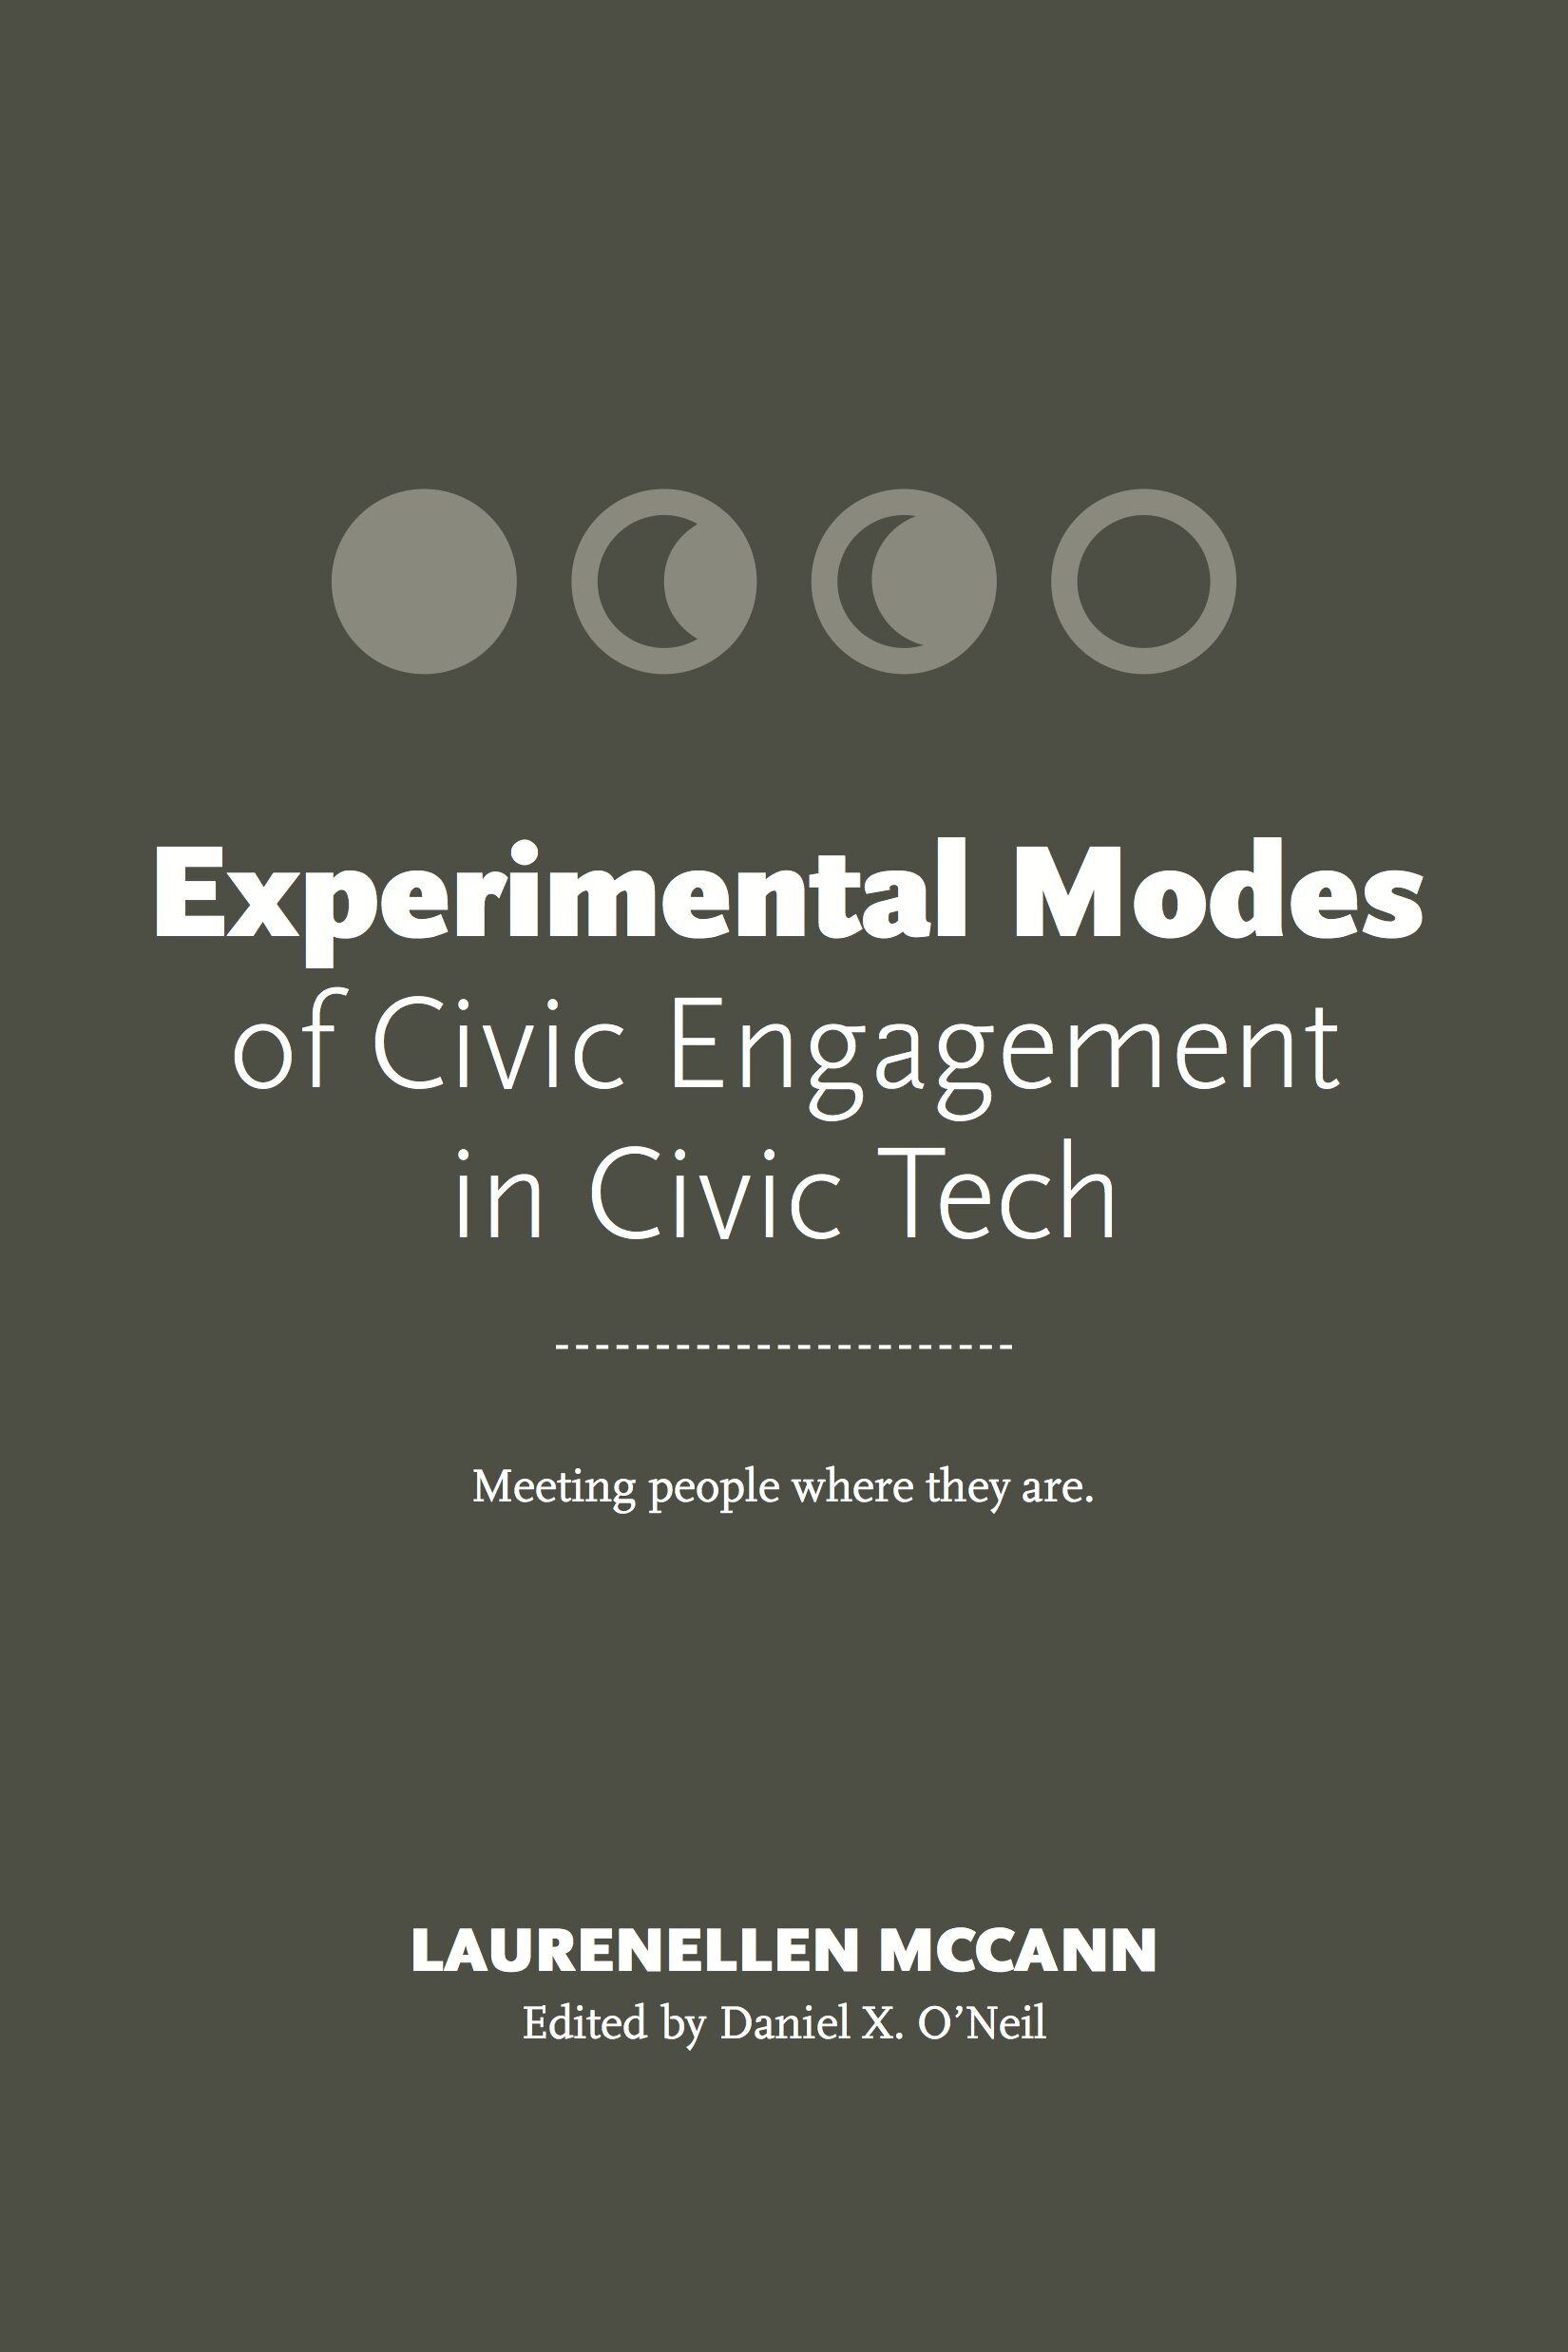 Launch: Experimental Modes of Civic Engagement in Civic Tech: Meeting people where they are.